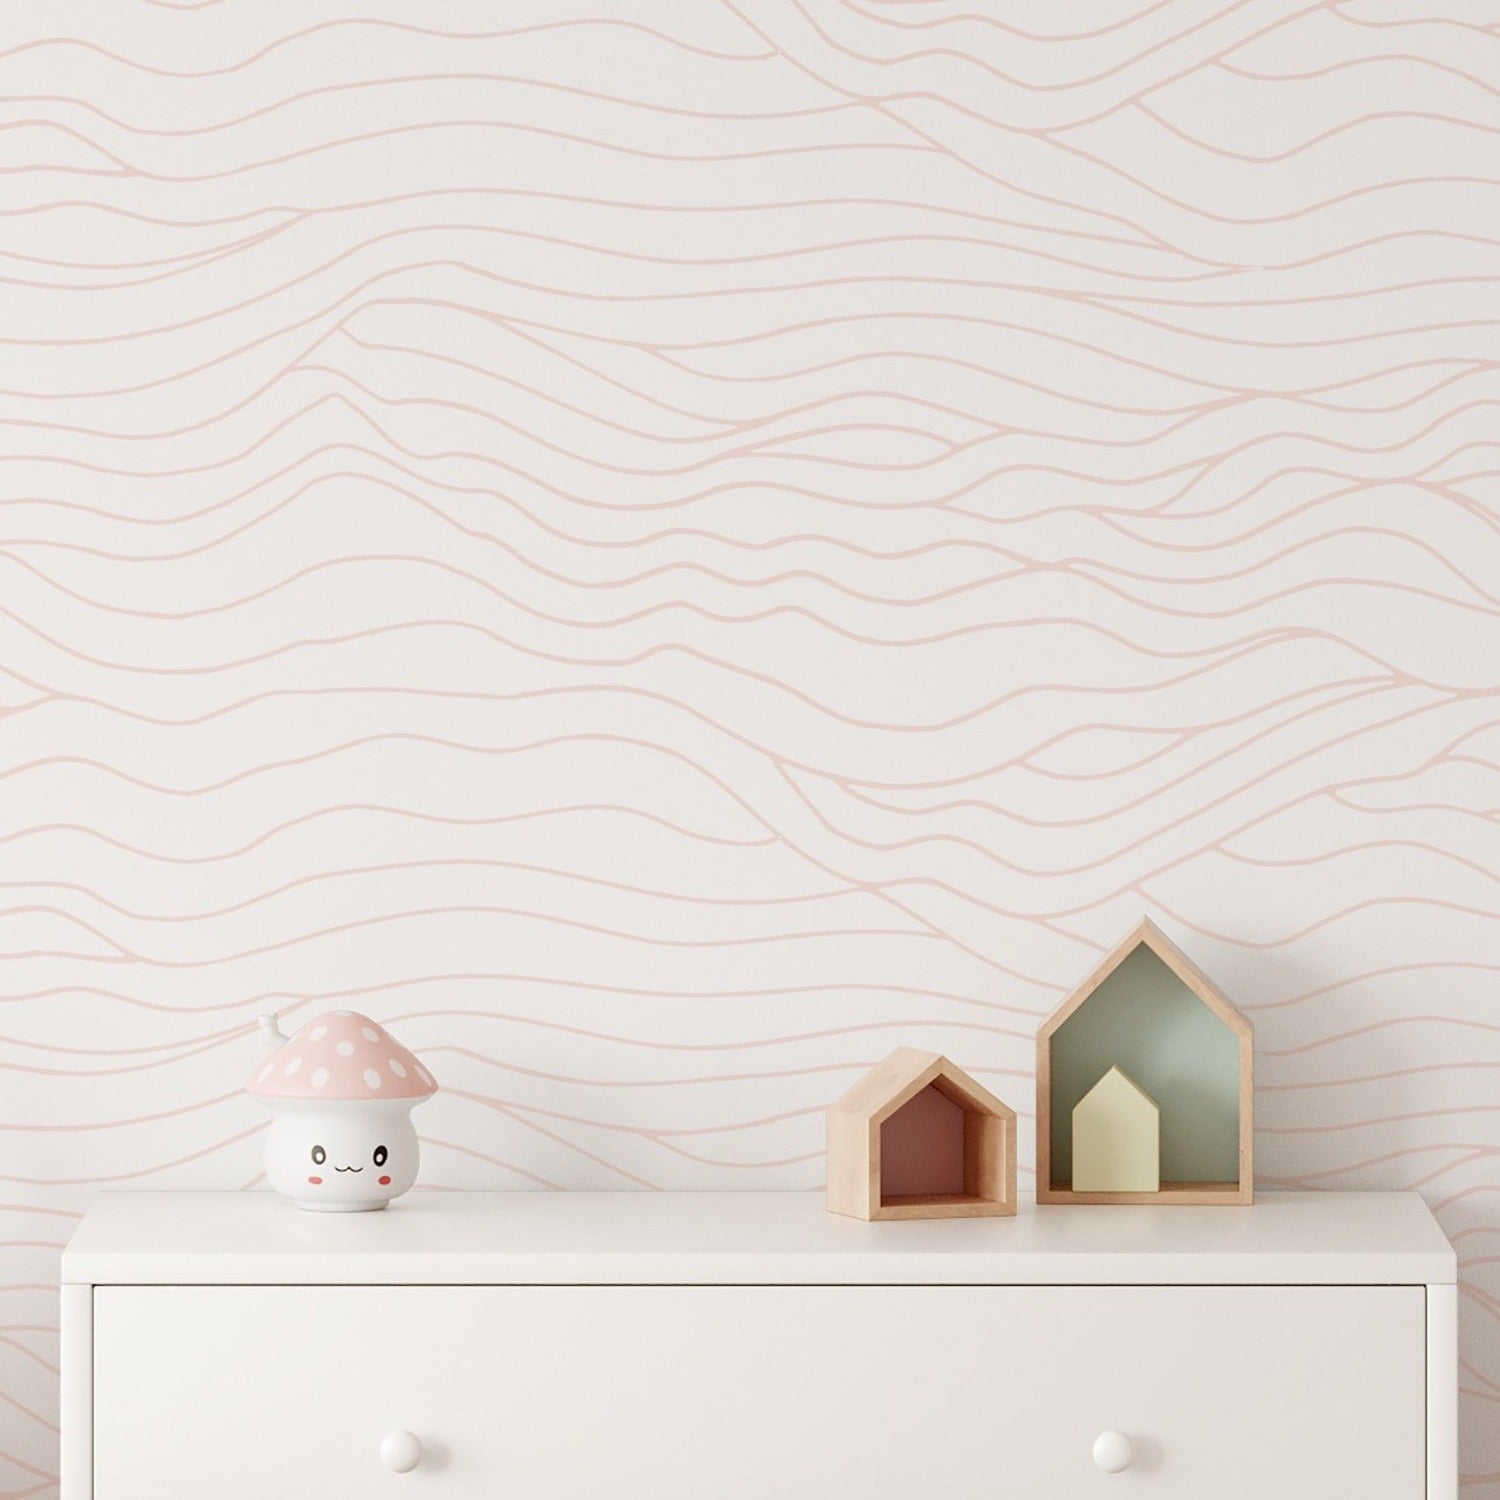 Close-up view of the Line Art Wave Wallpaper in a children's room setting. The wallpaper's delicate wavy lines in pastel pink offer a simple yet playful backdrop, harmonizing with the room's soft color palette and charming décor.